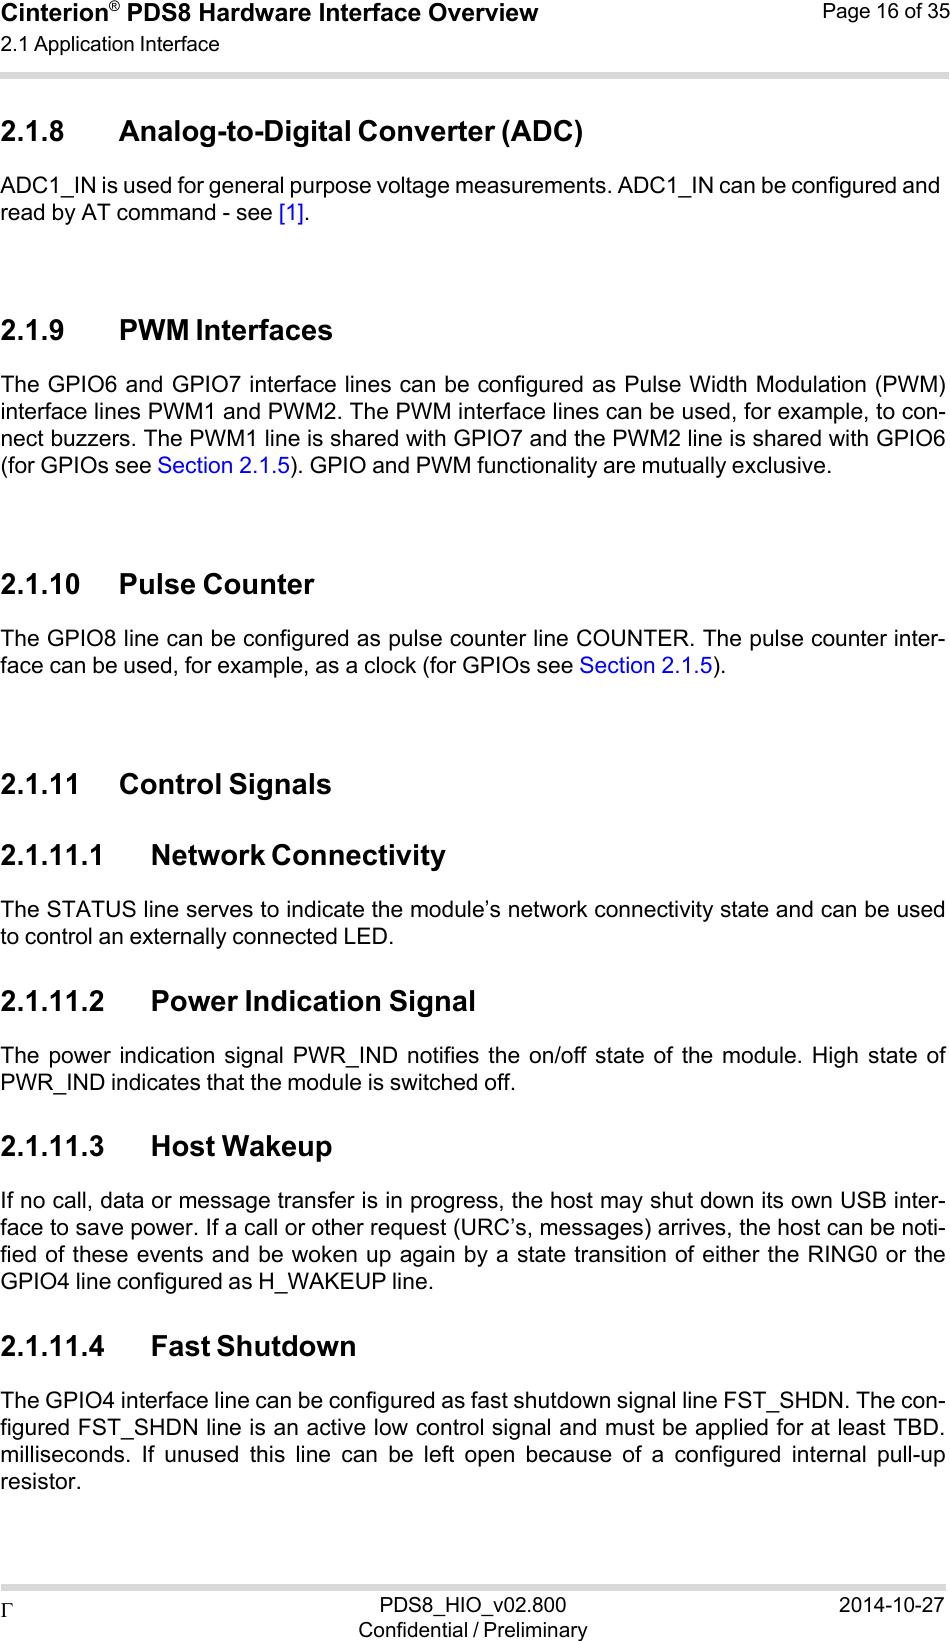  PDS8_HIO_v02.800Confidential / Preliminary2014-10-27Cinterion®  PDS8 Hardware Interface Overview 2.1 Application Interface Page 16 of 35   2.1.8 Analog-to-Digital Converter (ADC) ADC1_IN is used for general purpose voltage measurements. ADC1_IN can be configured and read by AT command - see [1].    2.1.9 PWM Interfaces The GPIO6 and GPIO7 interface lines can be configured as Pulse Width Modulation (PWM) interface lines PWM1 and PWM2. The PWM interface lines can be used, for example, to con- nect buzzers. The PWM1 line is shared with GPIO7 and the PWM2 line is shared with GPIO6 (for GPIOs see Section 2.1.5). GPIO and PWM functionality are mutually exclusive.    2.1.10 Pulse Counter The GPIO8 line can be configured as pulse counter line COUNTER. The pulse counter inter- face can be used, for example, as a clock (for GPIOs see Section 2.1.5).    2.1.11 Control Signals  2.1.11.1 Network Connectivity The STATUS line serves to indicate the module’s network connectivity state and can be used to control an externally connected LED.  2.1.11.2 Power Indication Signal The power  indication signal  PWR_IND  notifies the  on/off  state  of  the  module.  High  state of PWR_IND indicates that the module is switched off.  2.1.11.3 Host Wakeup If no call, data or message transfer is in progress, the host may shut down its own USB inter- face to save power. If a call or other request (URC’s, messages) arrives, the host can be noti- fied of these events and be woken up again by a state transition of either the RING0 or the GPIO4 line configured as H_WAKEUP line.  2.1.11.4 Fast Shutdown The GPIO4 interface line can be configured as fast shutdown signal line FST_SHDN. The con- figured FST_SHDN line is an active low control signal and must be applied for at least TBD. milliseconds.  If  unused  this  line  can  be  left  open  because  of  a  configured  internal  pull-up resistor. 